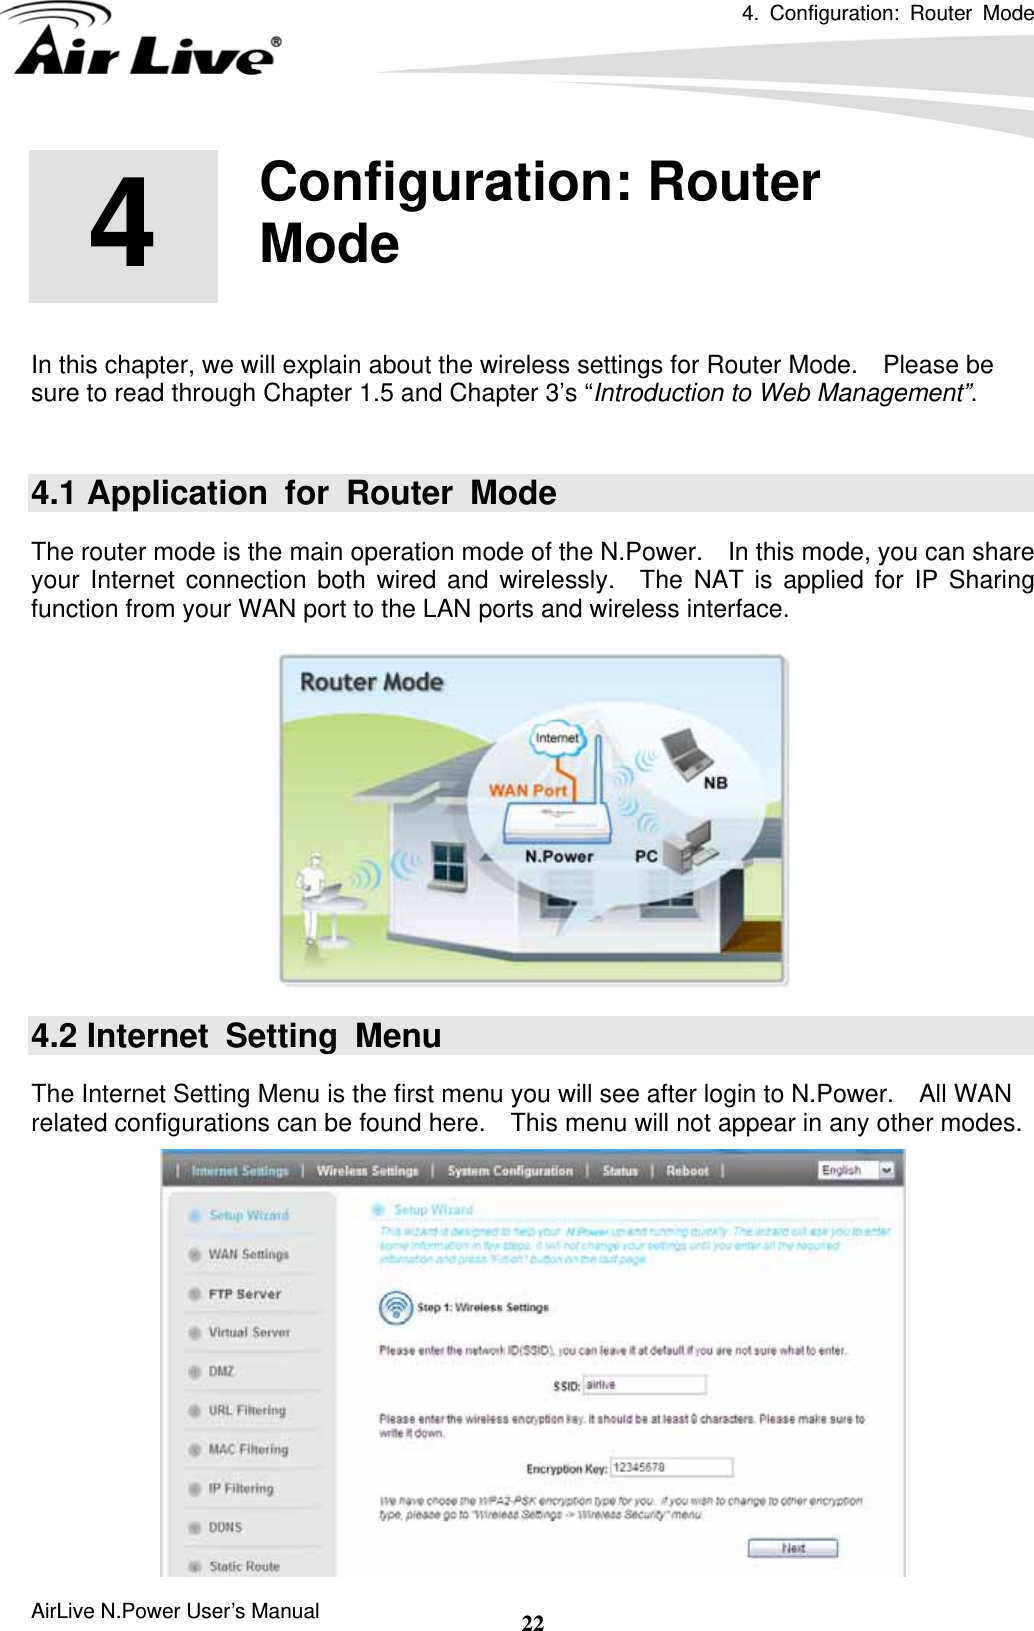 4. Configuration: Router Mode  AirLive N.Power User’s Manual  22       In this chapter, we will explain about the wireless settings for Router Mode.    Please be sure to read through Chapter 1.5 and Chapter 3’s “Introduction to Web Management”.    4.1 Application for Router Mode The router mode is the main operation mode of the N.Power.    In this mode, you can share your Internet connection both wired and wirelessly.  The NAT is applied for IP Sharing function from your WAN port to the LAN ports and wireless interface.  4.2 Internet Setting Menu The Internet Setting Menu is the first menu you will see after login to N.Power.    All WAN related configurations can be found here.    This menu will not appear in any other modes.  4  4.  Configuration: Router Mode  